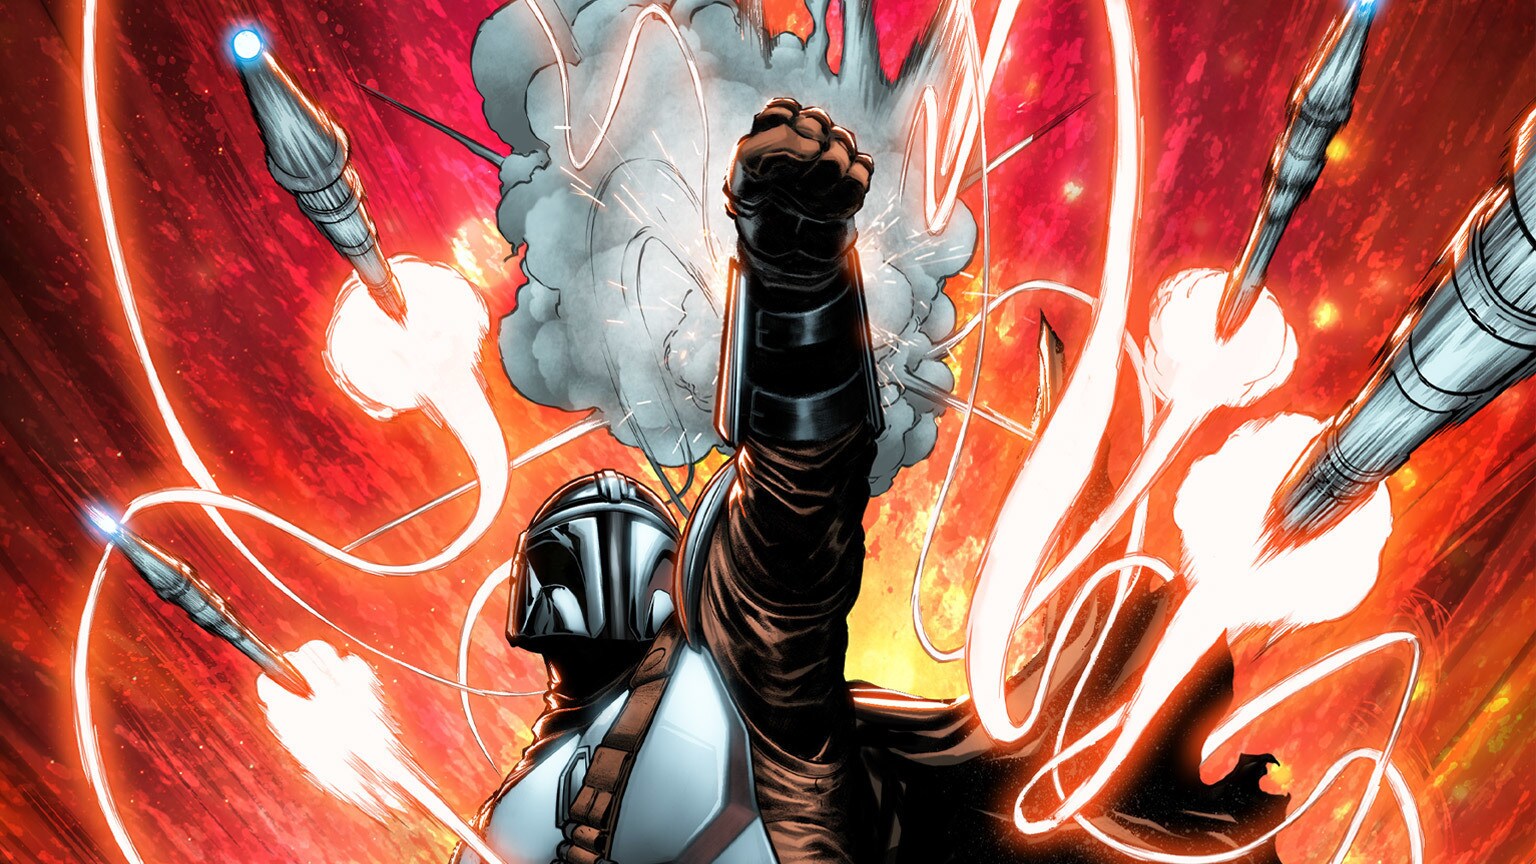 An Upgrade -- and New Tensions -- in Marvel’s Star Wars: The Mandalorian #3 - Exclusive Preview